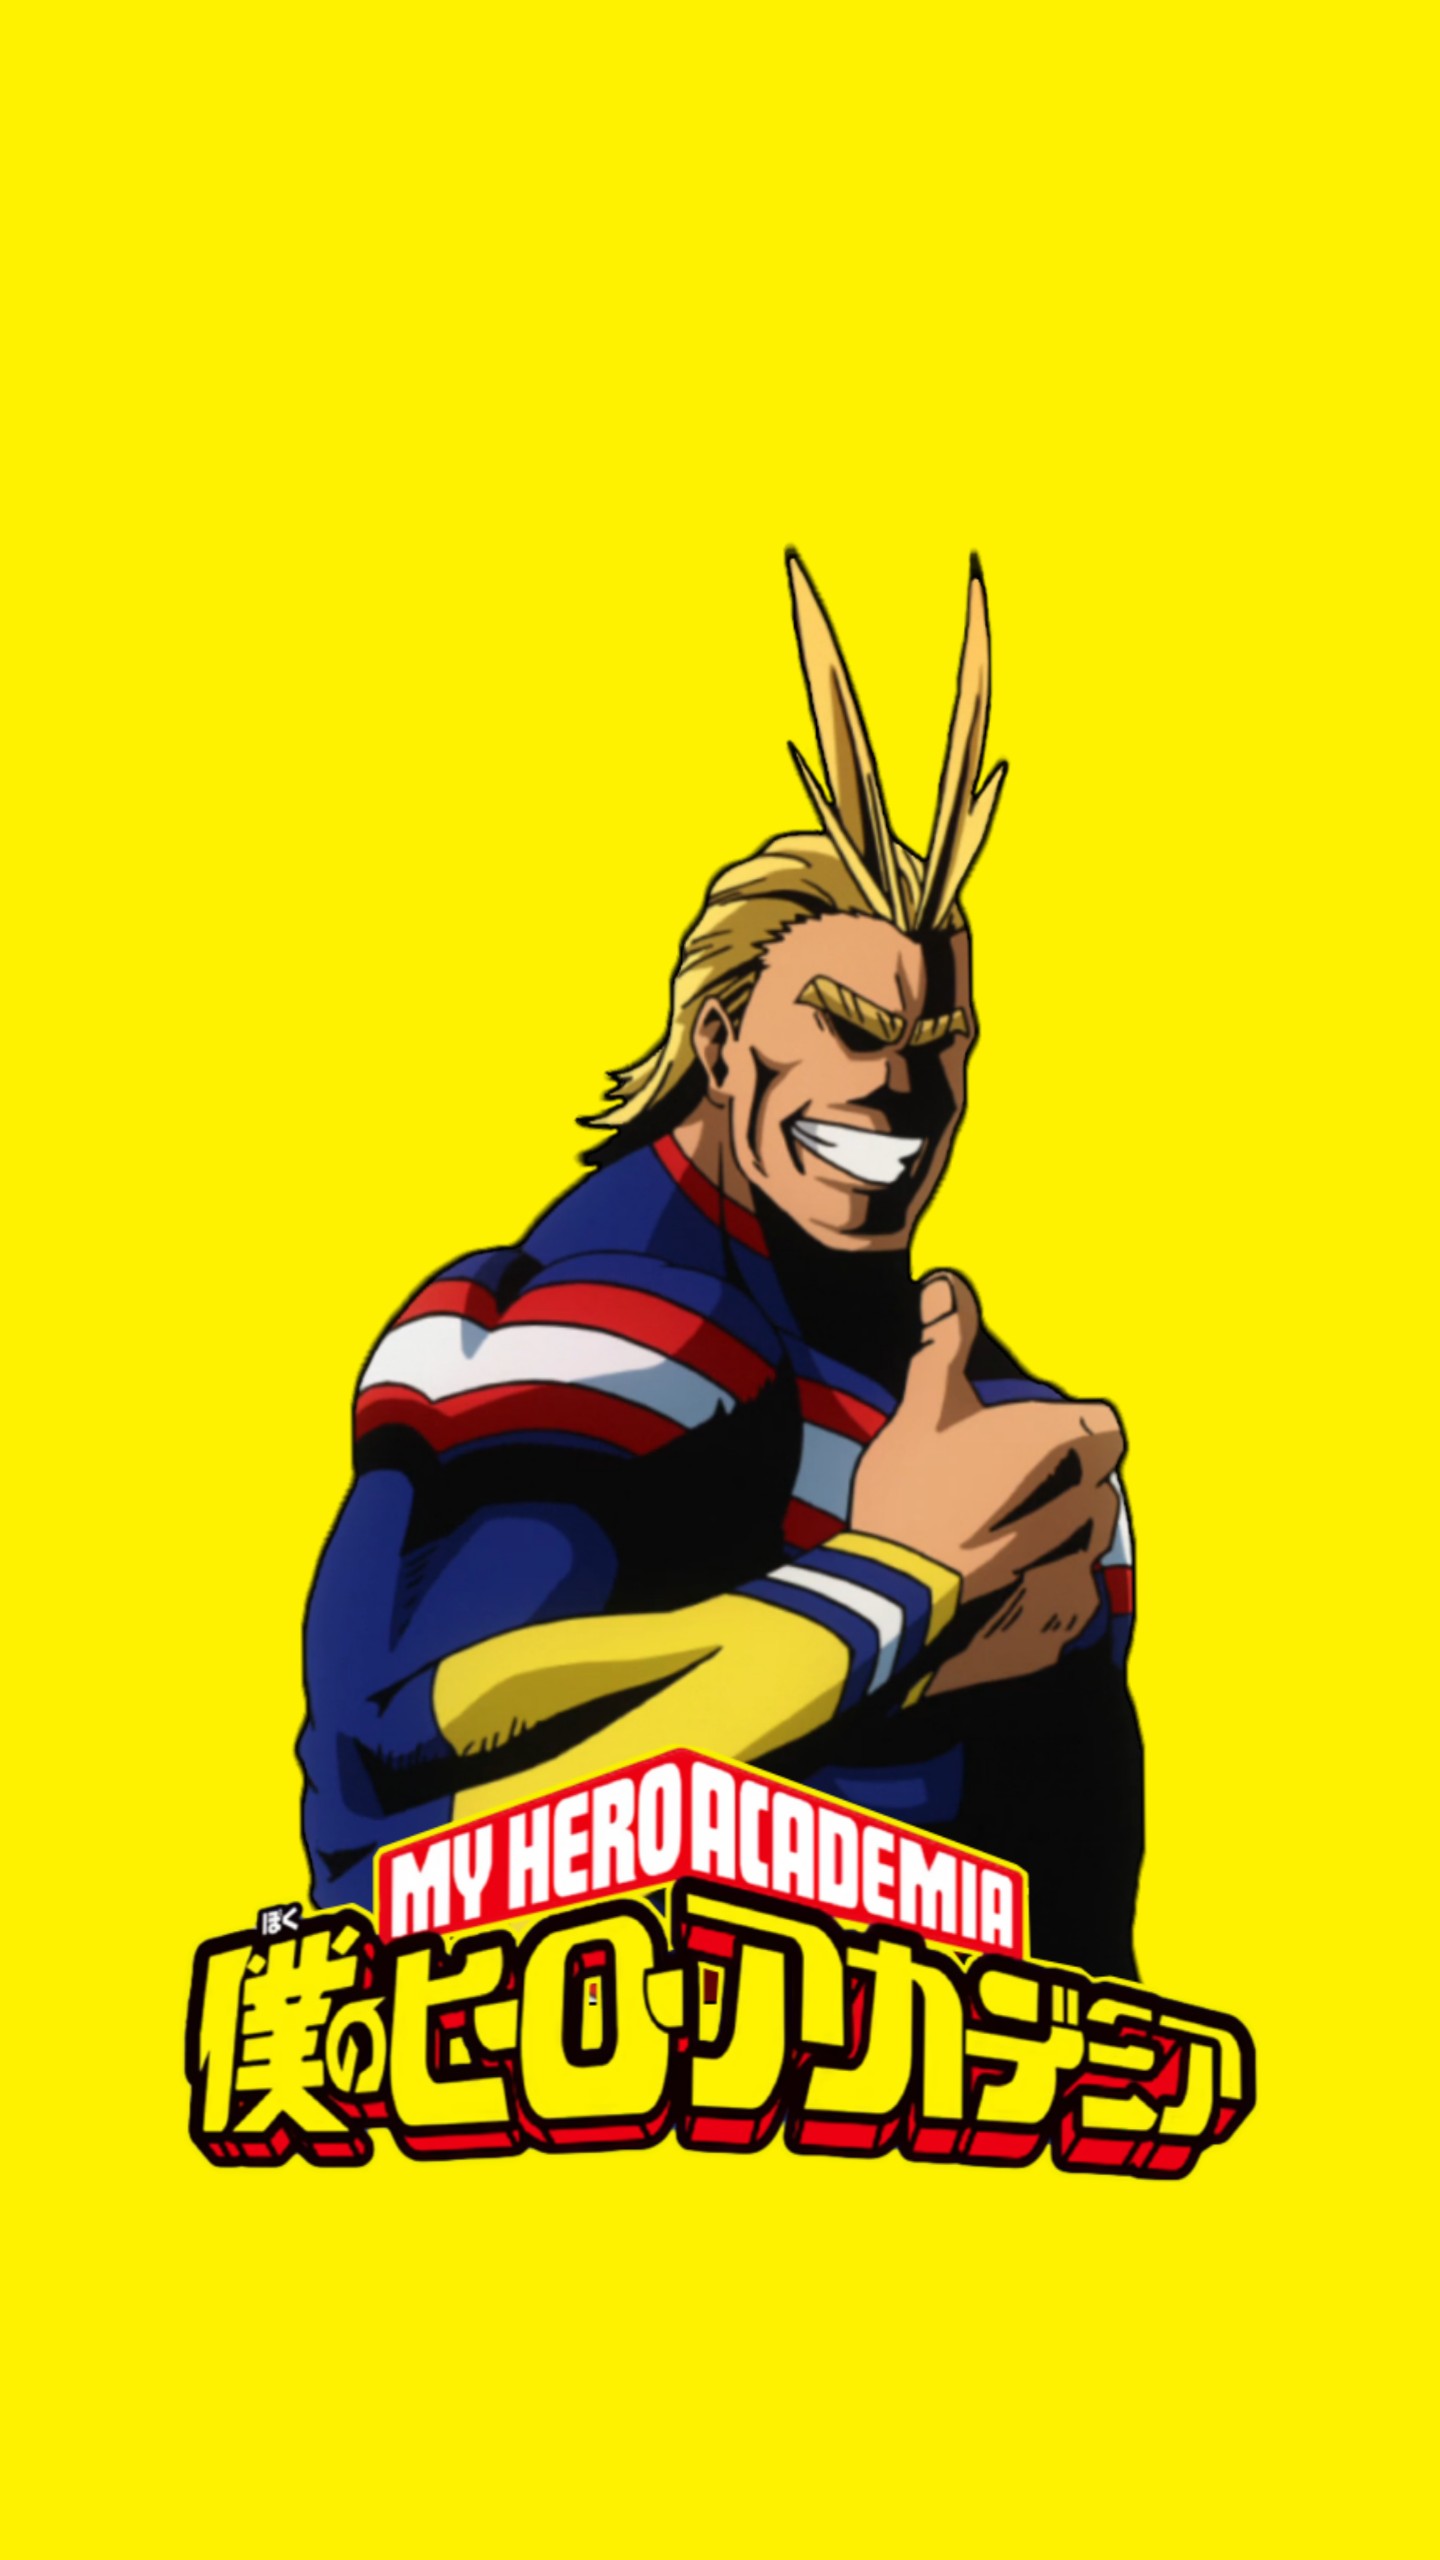 All Might Thumbs Up - HD Wallpaper 